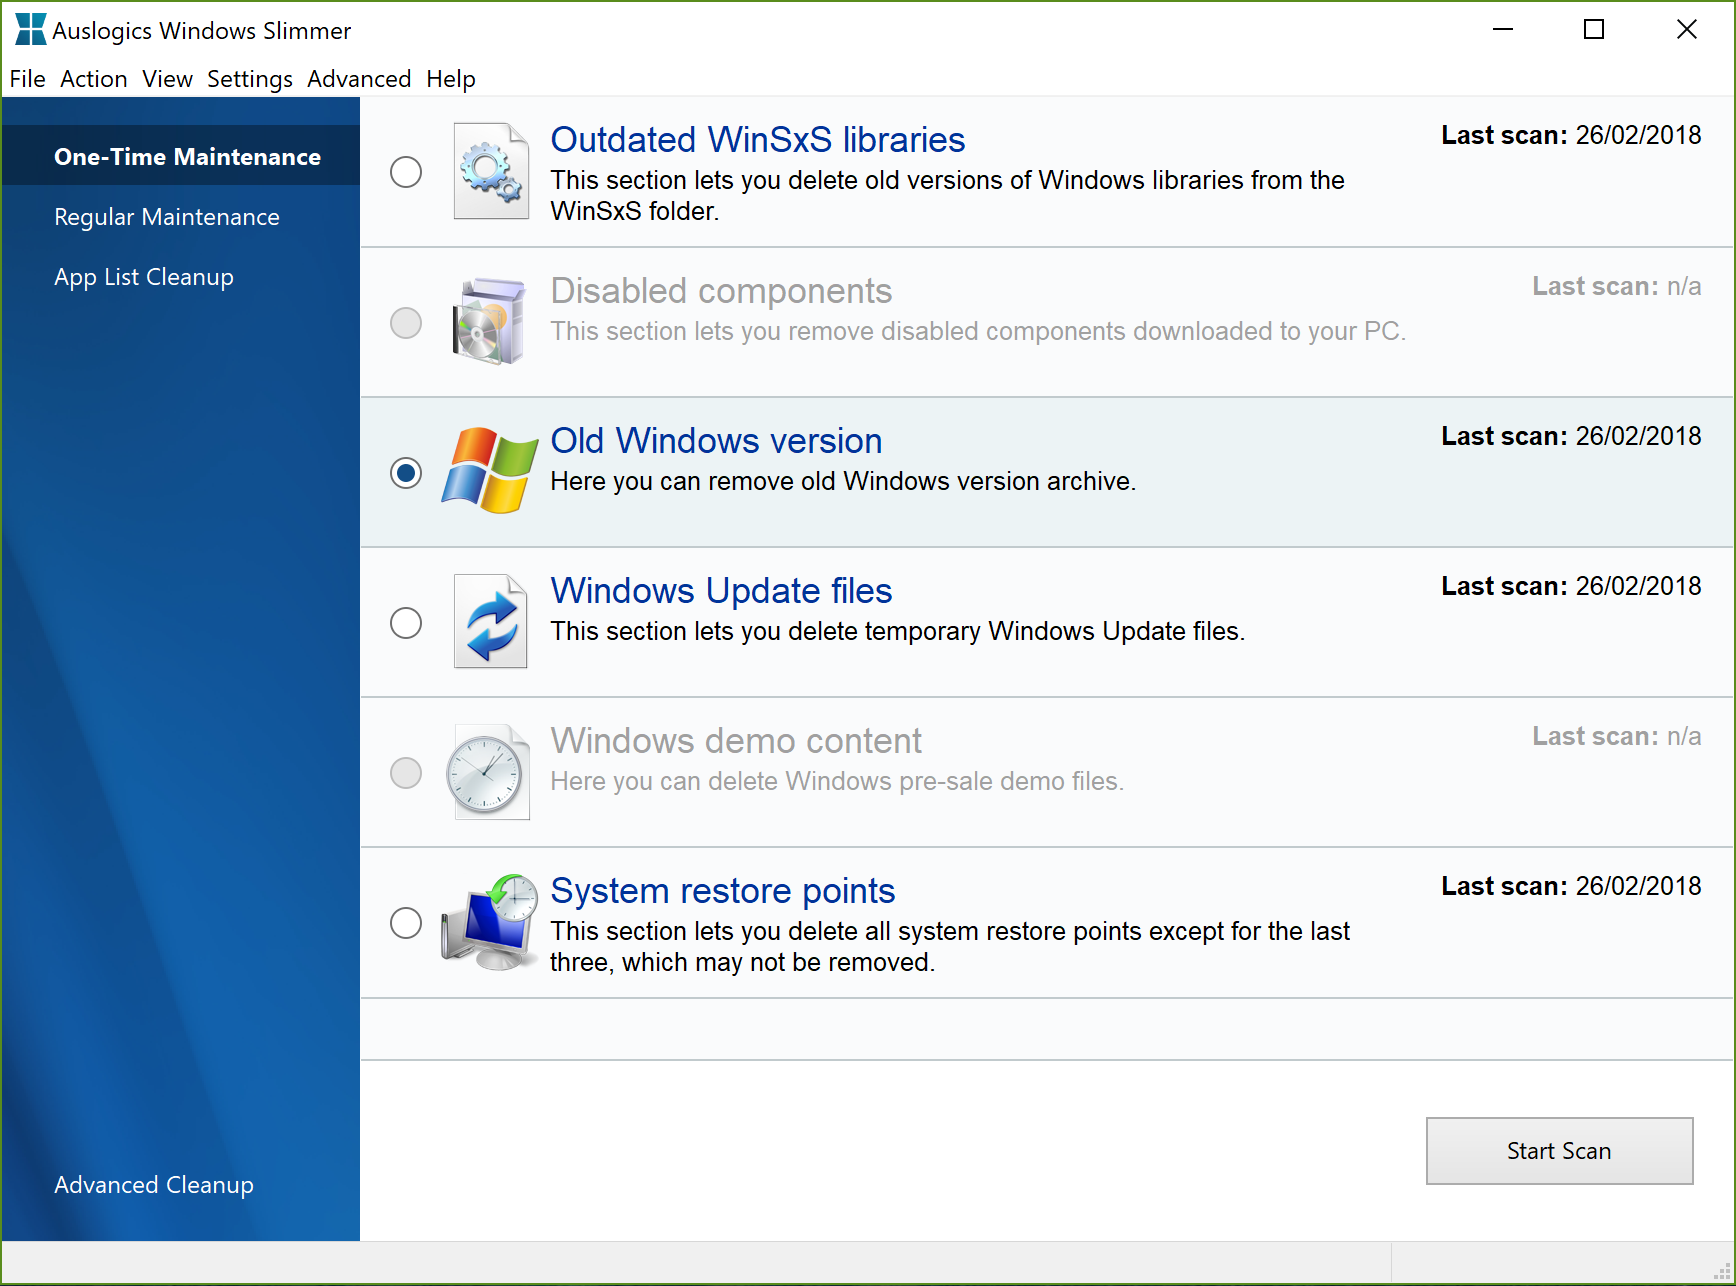 Auslogics Windows Slimmer isn't just another utility tool in the market.